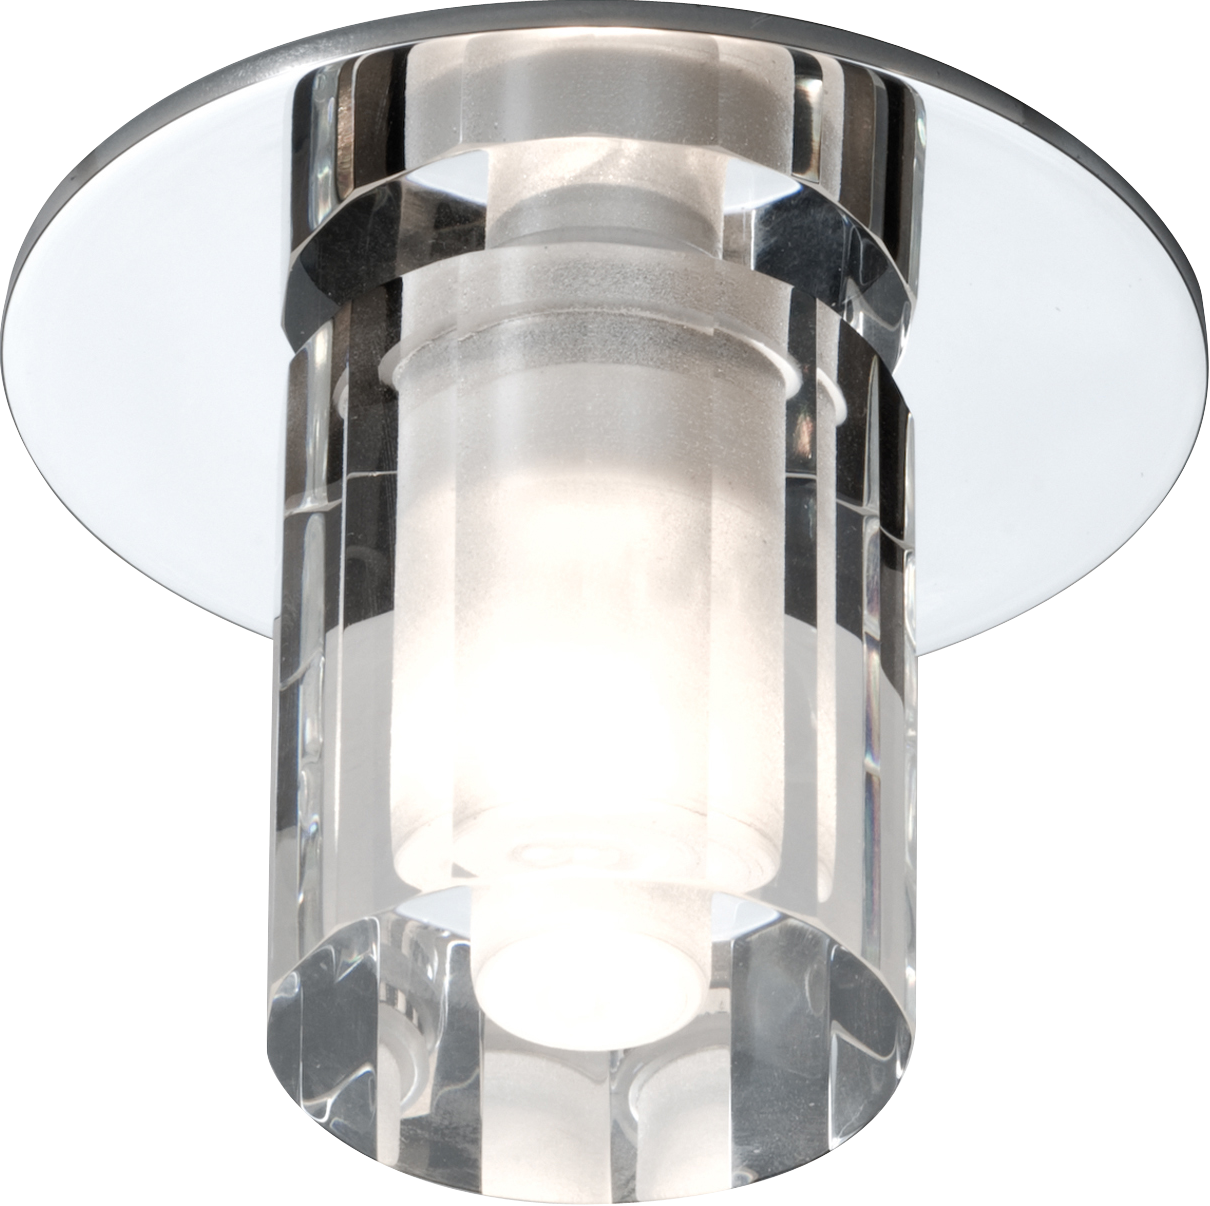 IP65 LV Decorative Round Glass Fitting (comes With Lamp) - DEC1233C - SOLD-OUT!! 